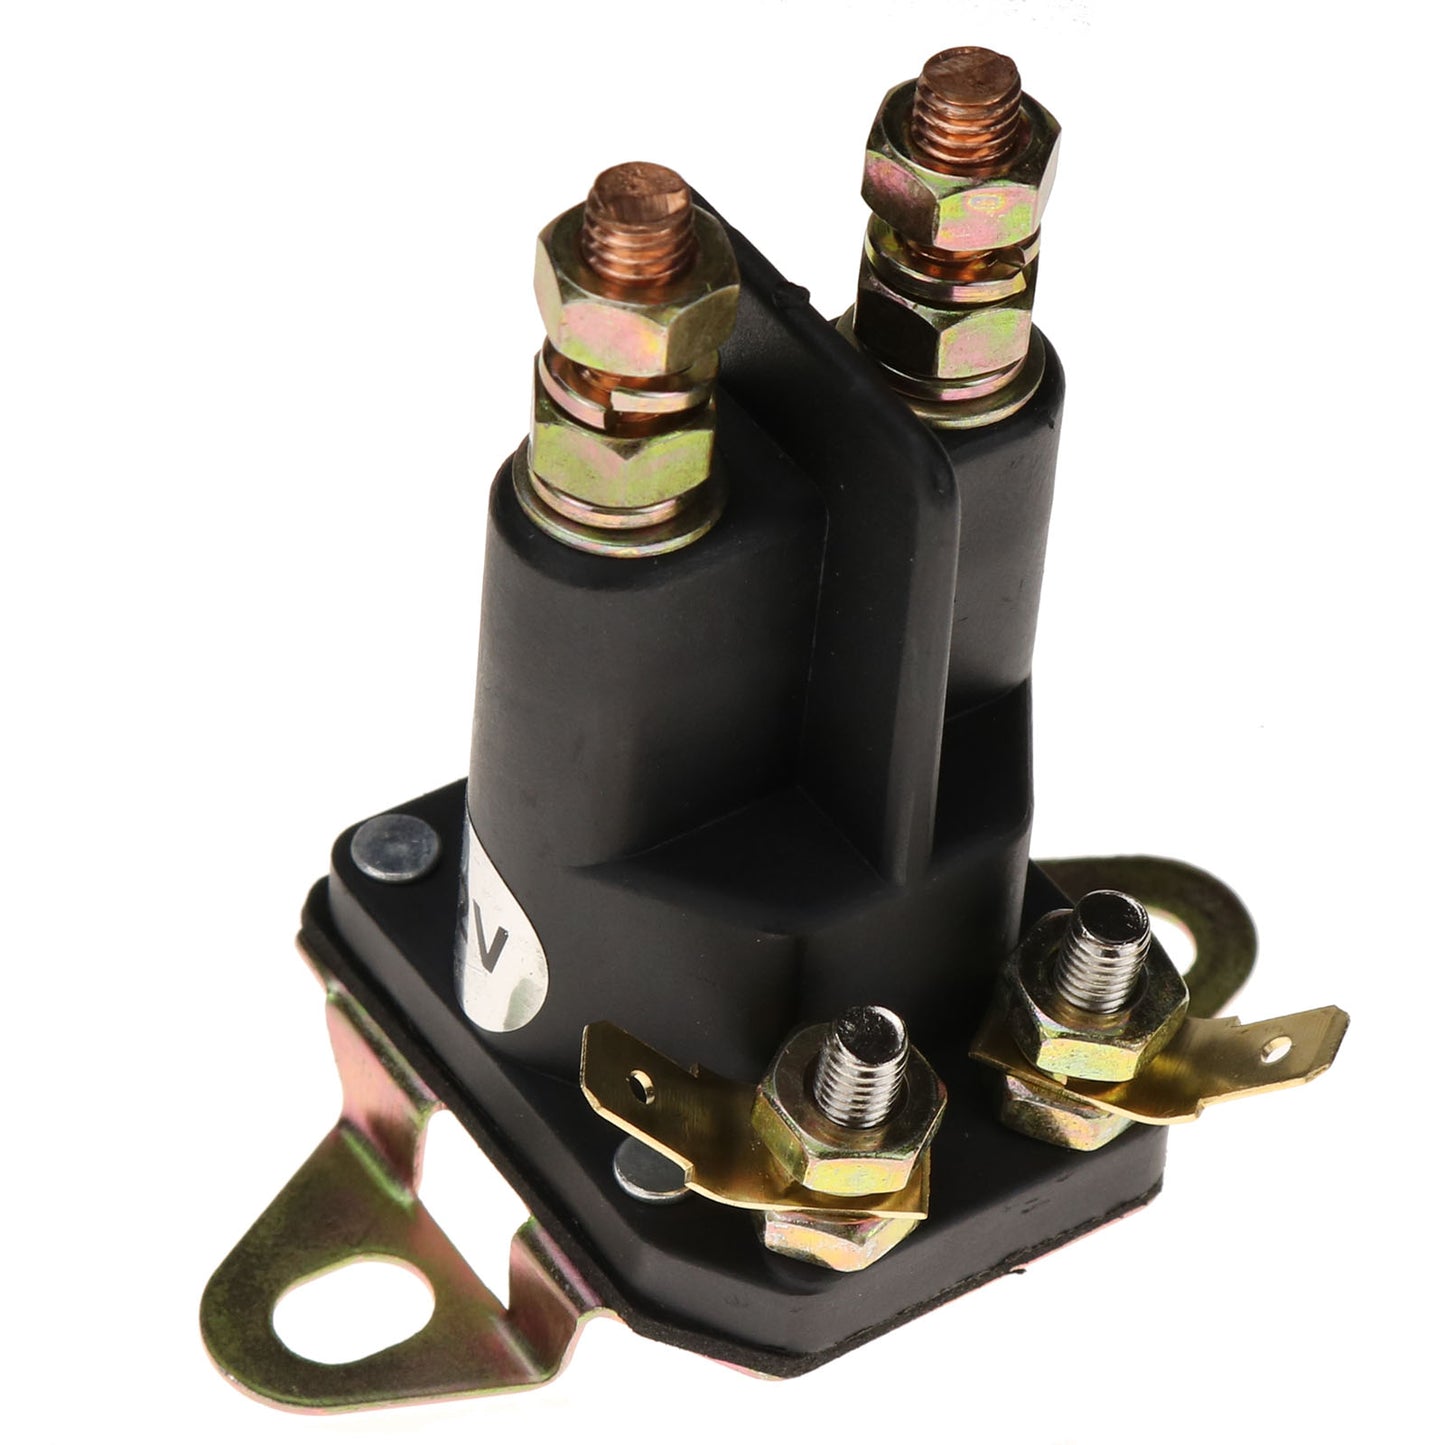 New Starter Solenoid Relay Compatible with Cub Cadet Trombetta 2654 532146154 Craftsman LT1000 Poulan 146154 73233 Lawn Mowers